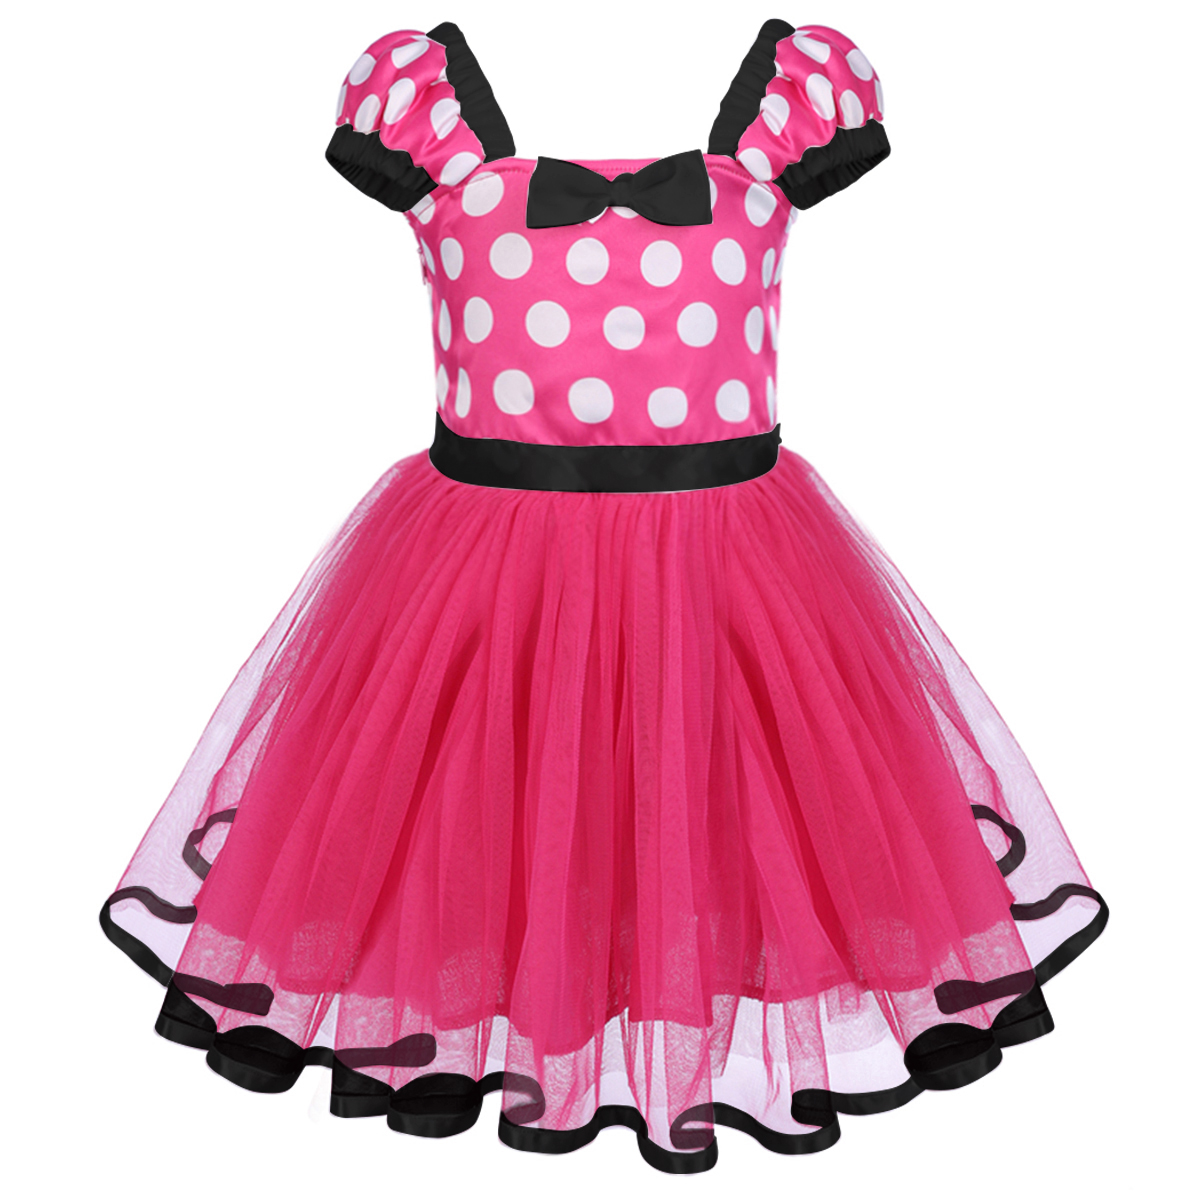 IBTOM CASTLE Toddler Girls Polka Dots Princess Party Cosplay Pageant Fancy Dress up Birthday Tutu Dress + Ears Headband Outfit Set 18-24 Months Hot Pink + Black - image 3 of 6